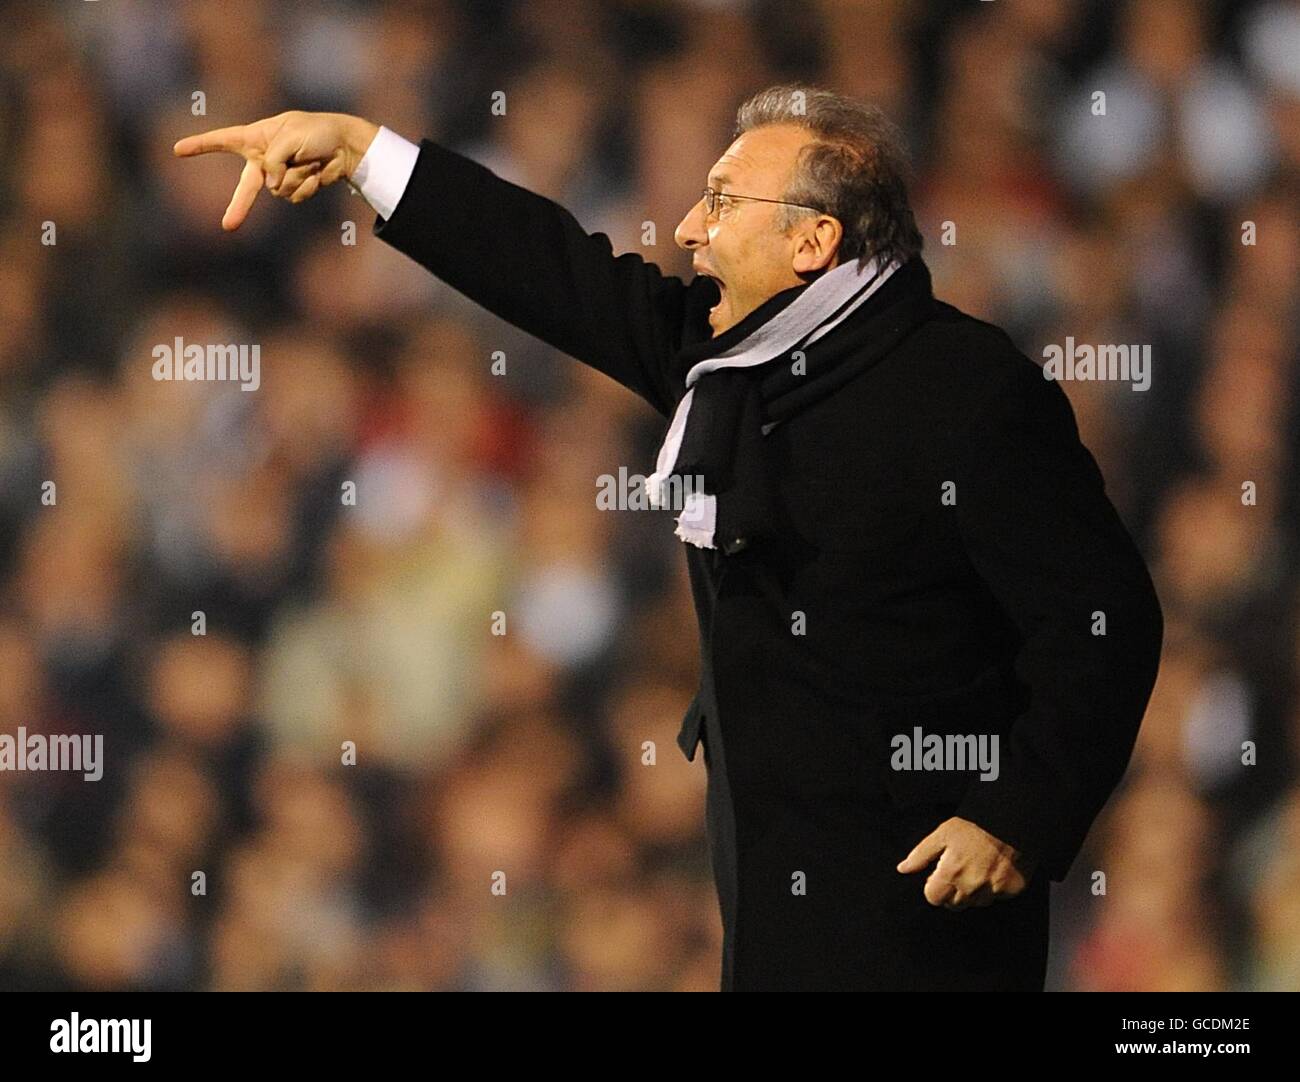 Juventus manager Alberto Zaccheroni gestures and shouts from the touchline. Stock Photo